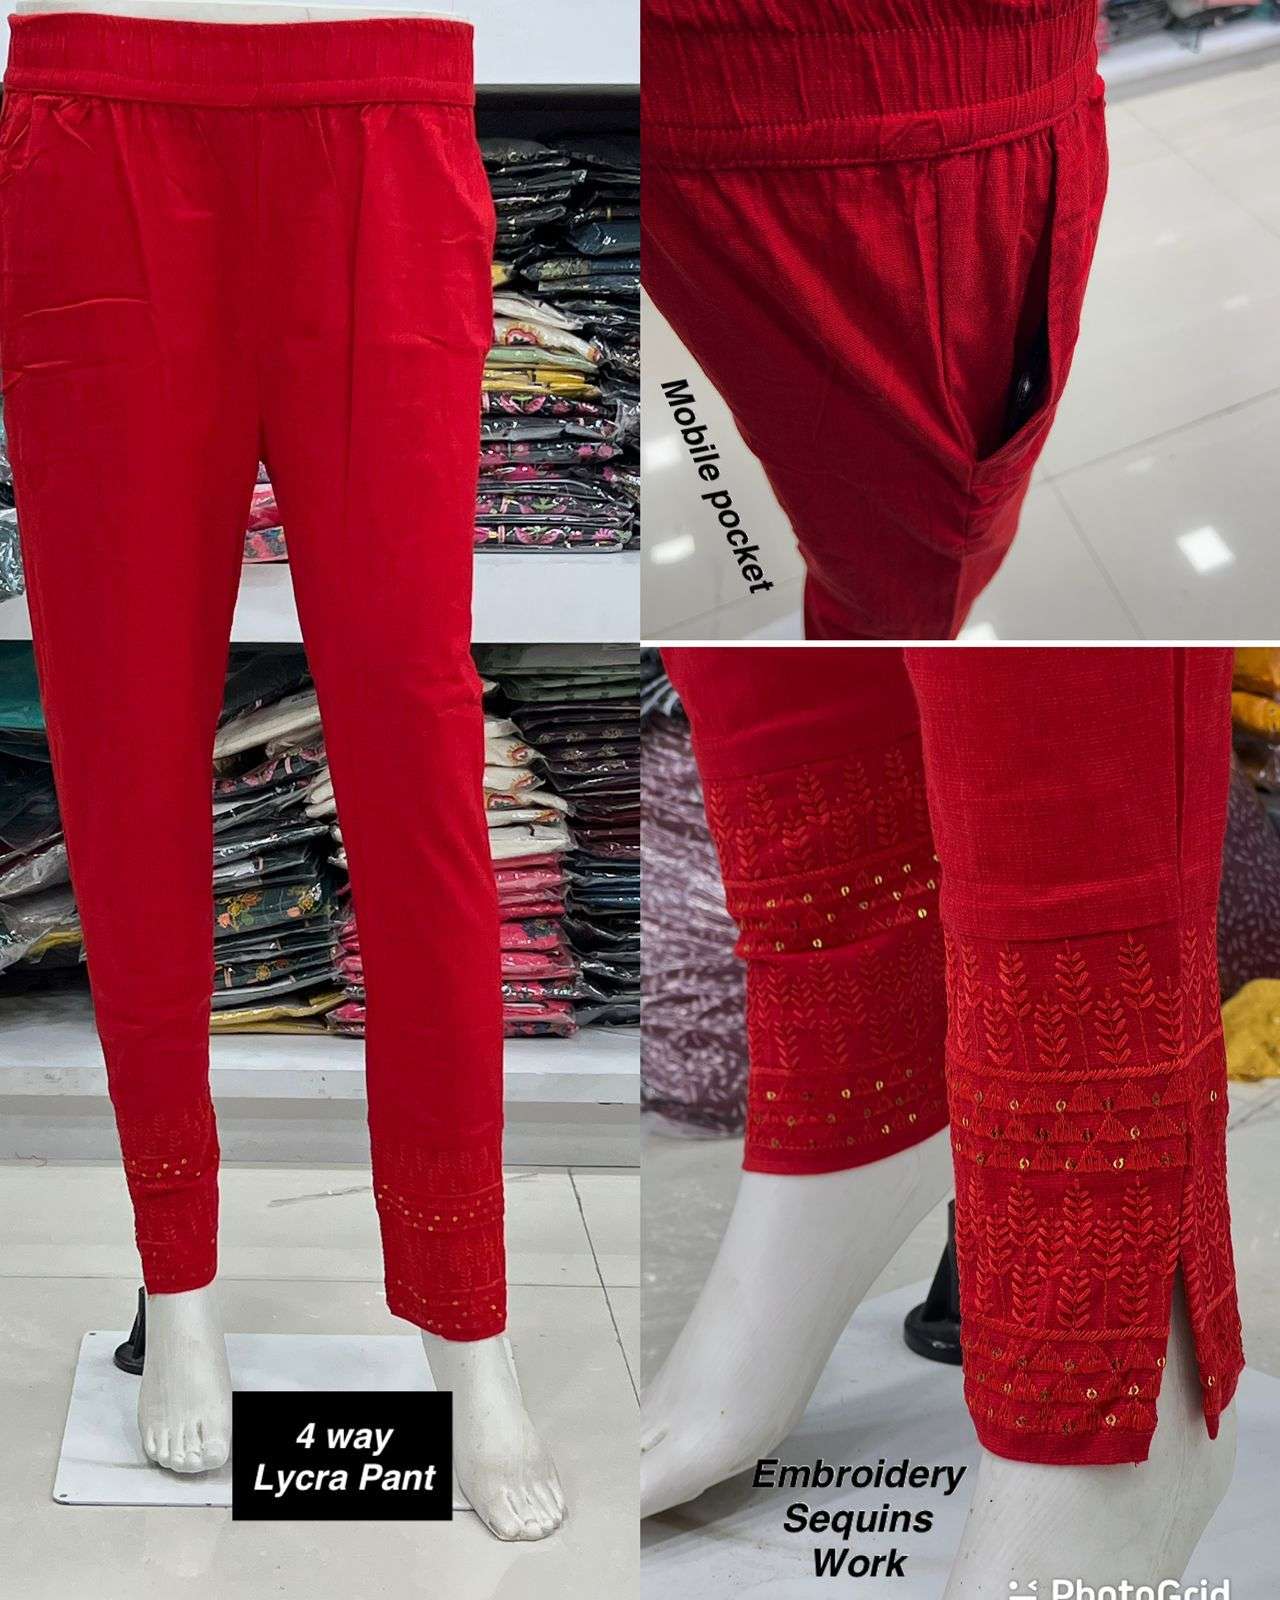 High Waist Lycra Offline Yoga Pants For Women Solid Color Sports Leggings  With Elastic Fit For Gym And Outdoor Fitness L34 Dy Sports Trousers From  Yuanmu23, $19.21 | DHgate.Com